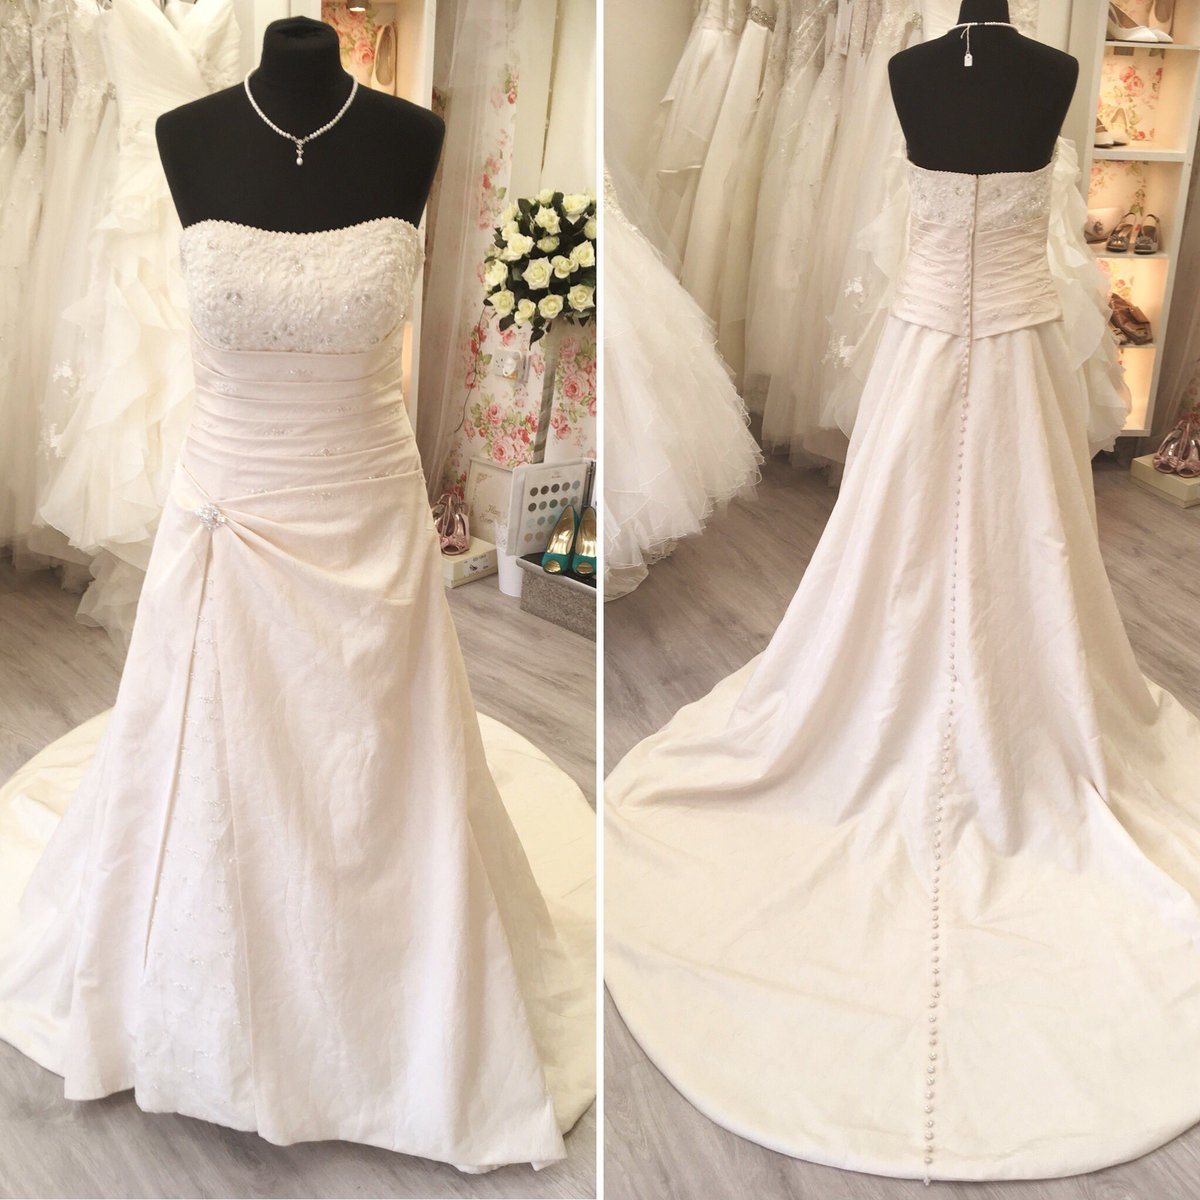 #EllisBridalWeddingDress 
Light gold textured fabric #A-line gown with beautiful embellished bodice. Zip fastening with covered buttons down the full length of the train
Size 14
£330
Ex sample with tags #stockportweddings #stockportbride #weddingdress #preloved